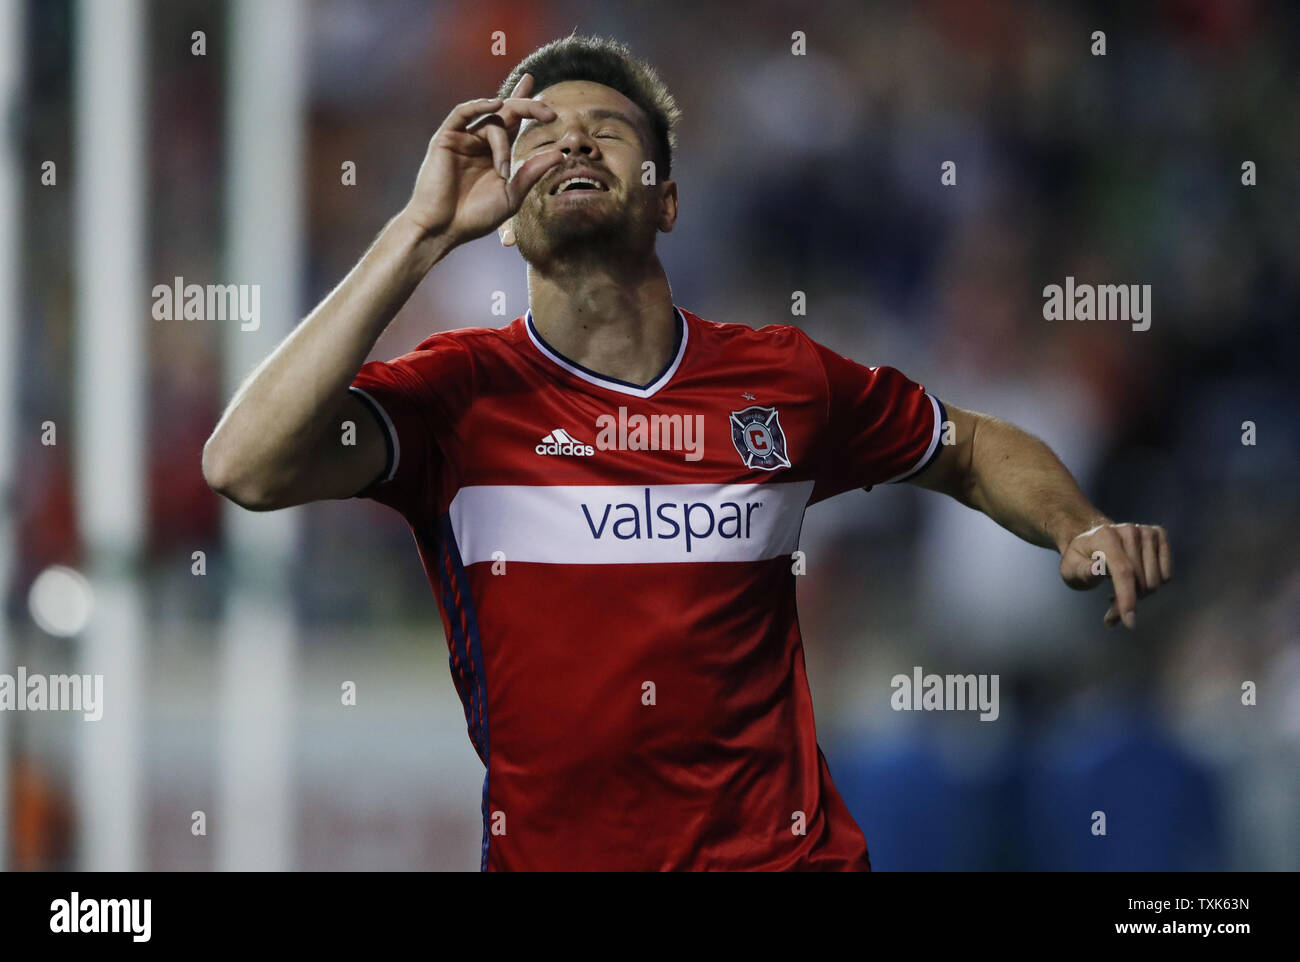 Chicago Fire forward Luis Solignac reacts after scoring during the second half of the MLS game against the Seattle Sounders at the Toyota Park on May 13, 2017 in Bridgeview, Ill. Photo by Kamil Krzaczynski/UPI Stock Photo